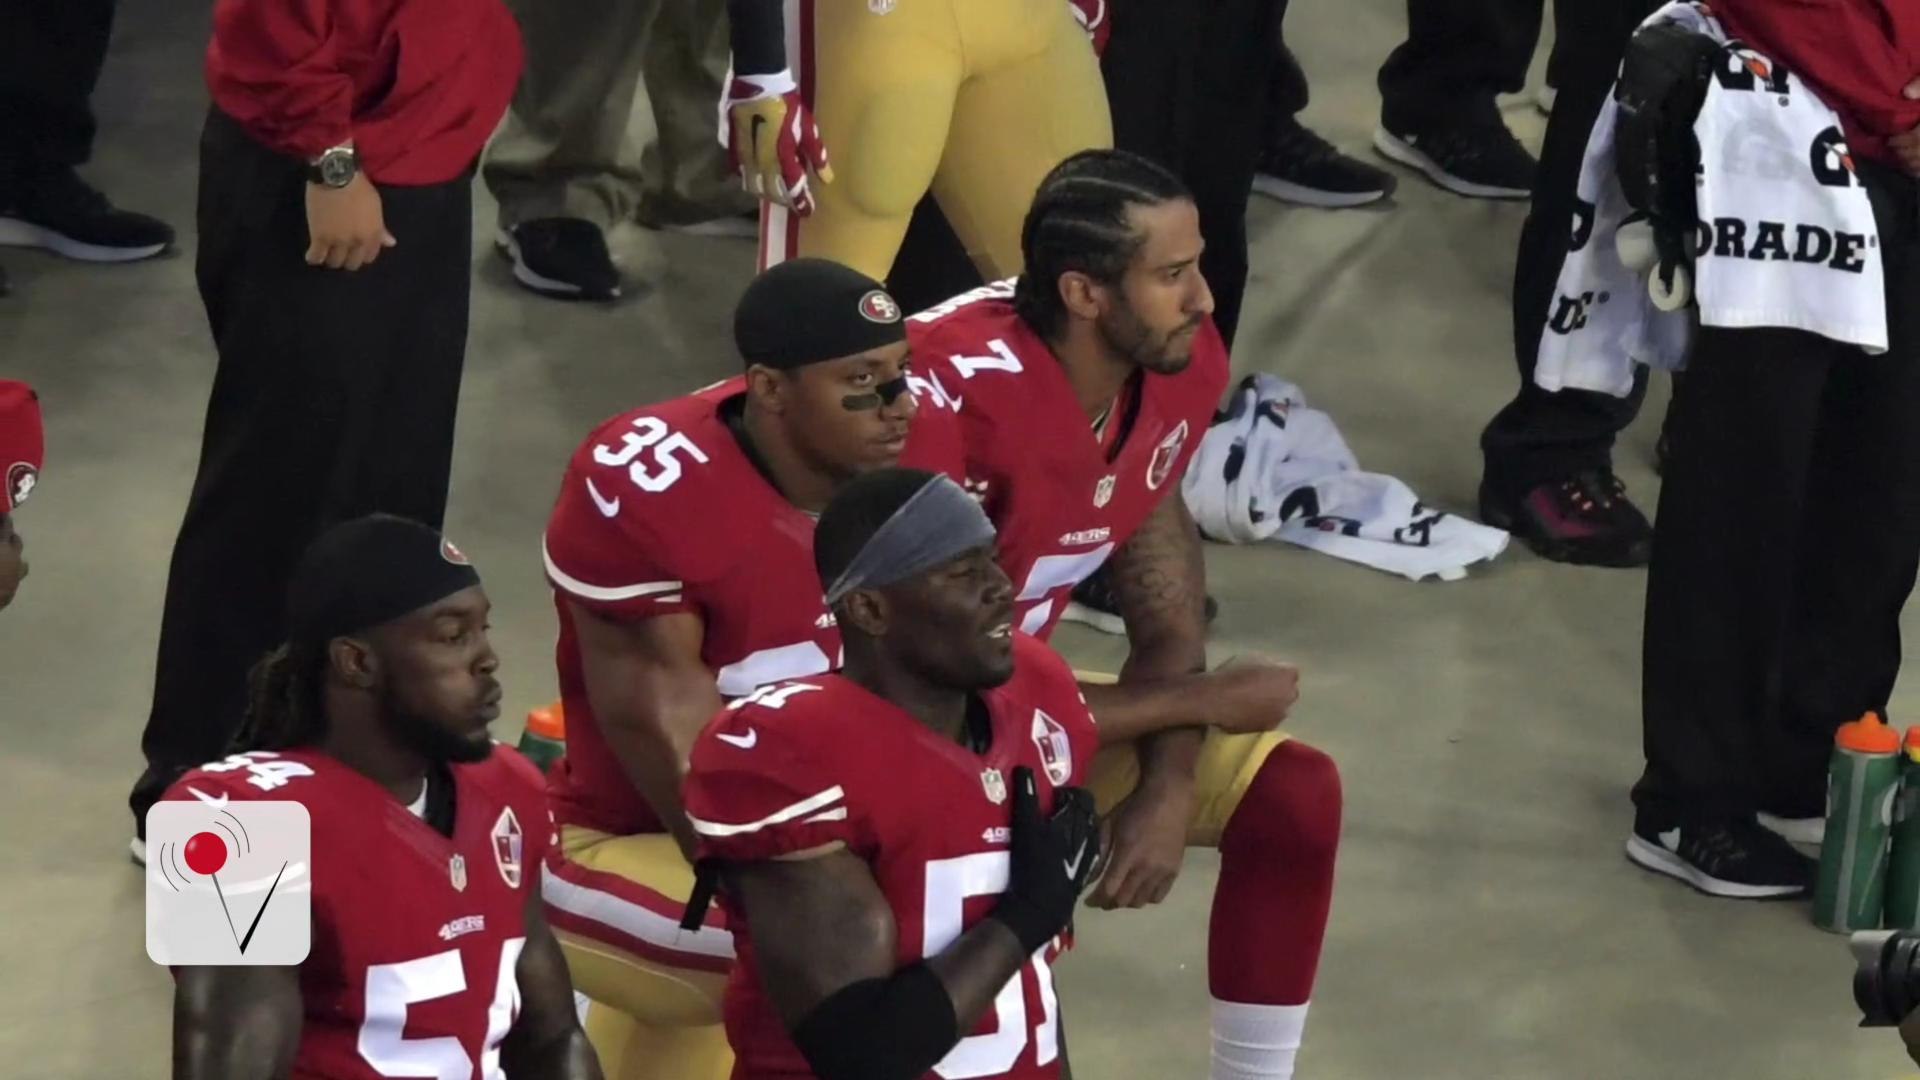 Top Republican Links Colin Kaepernick's Activism To Isis